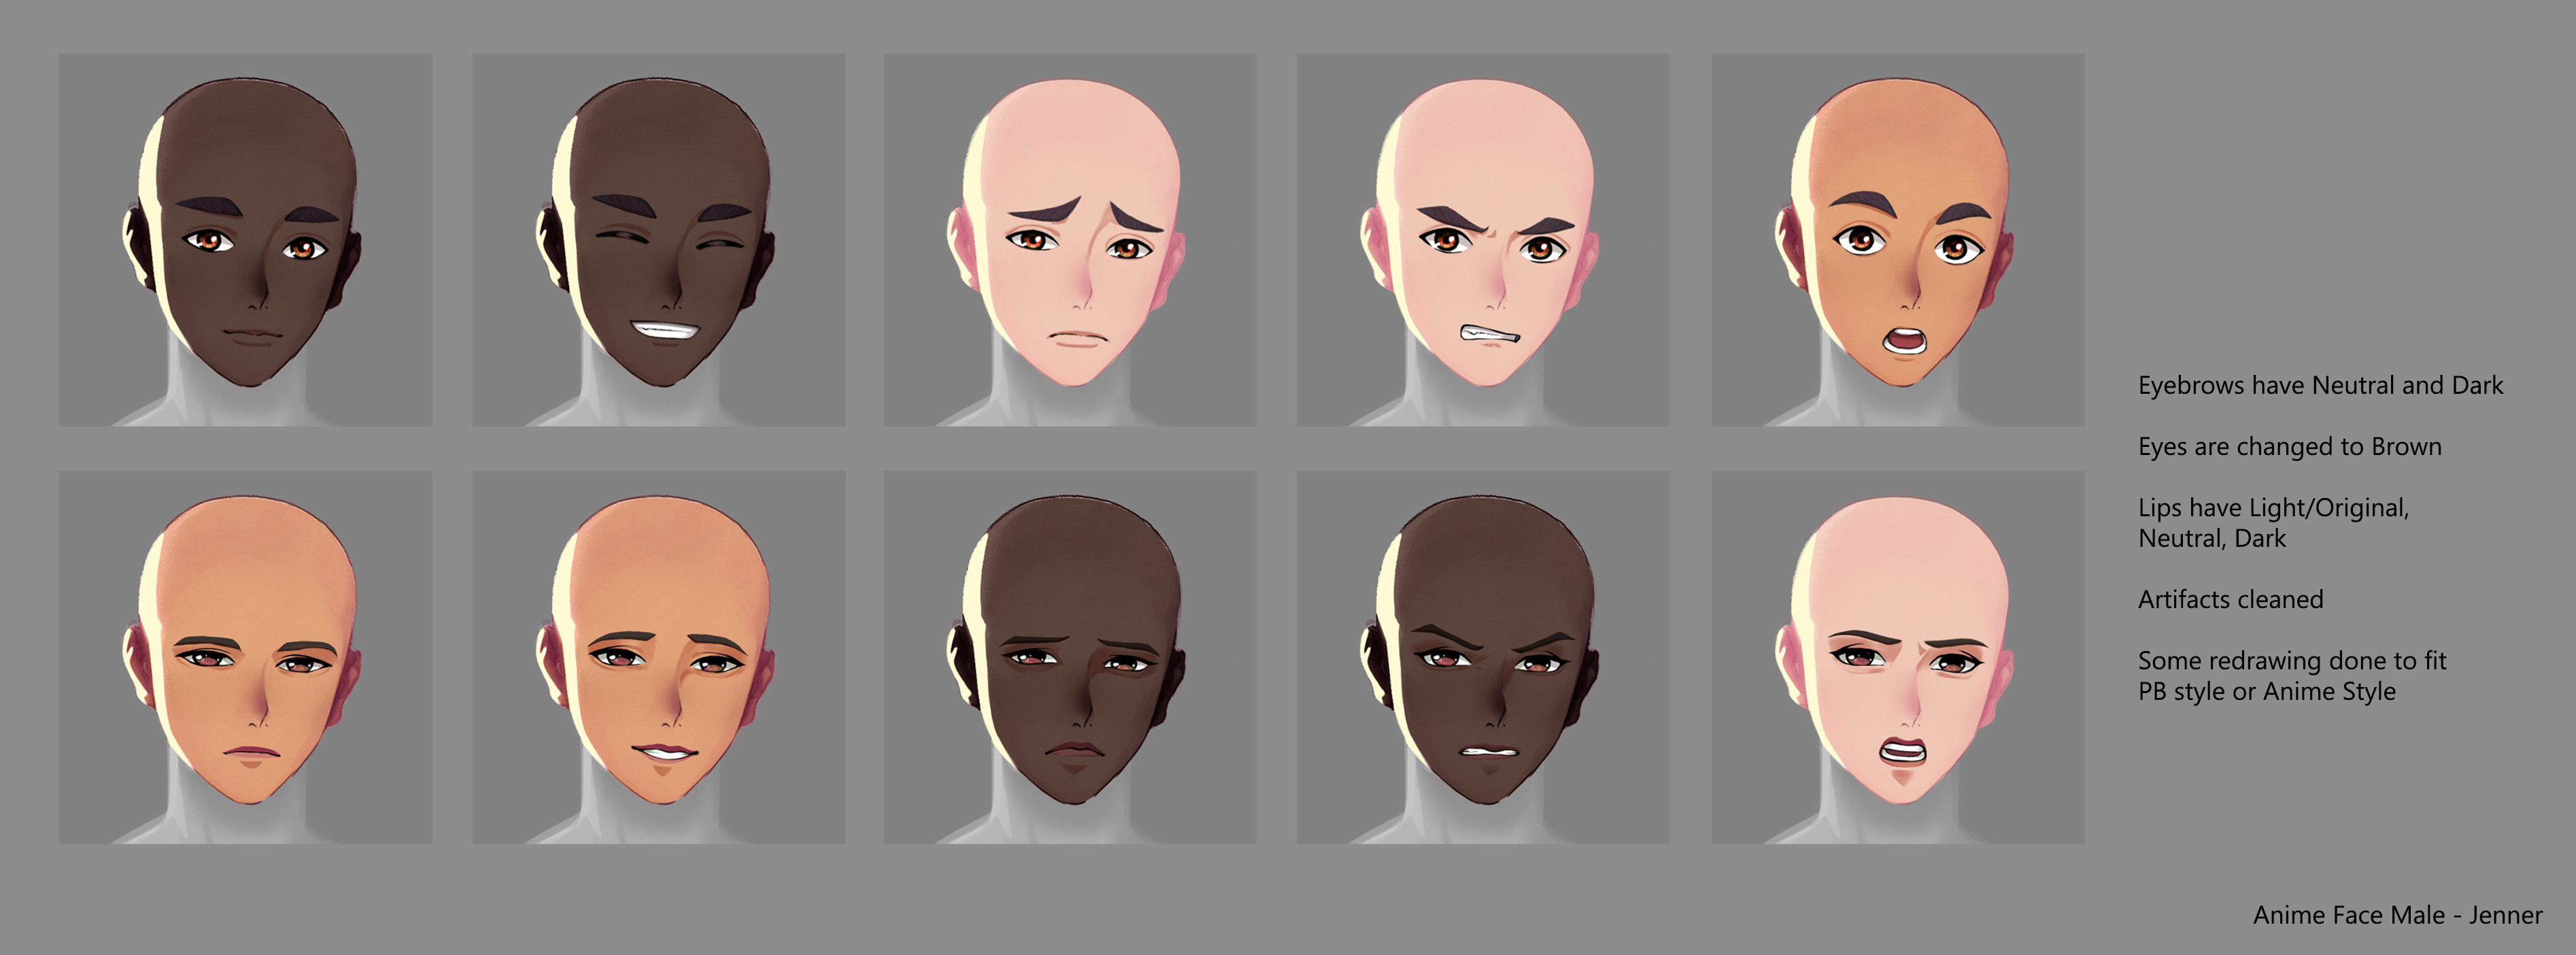 Example of faces working with different skintones